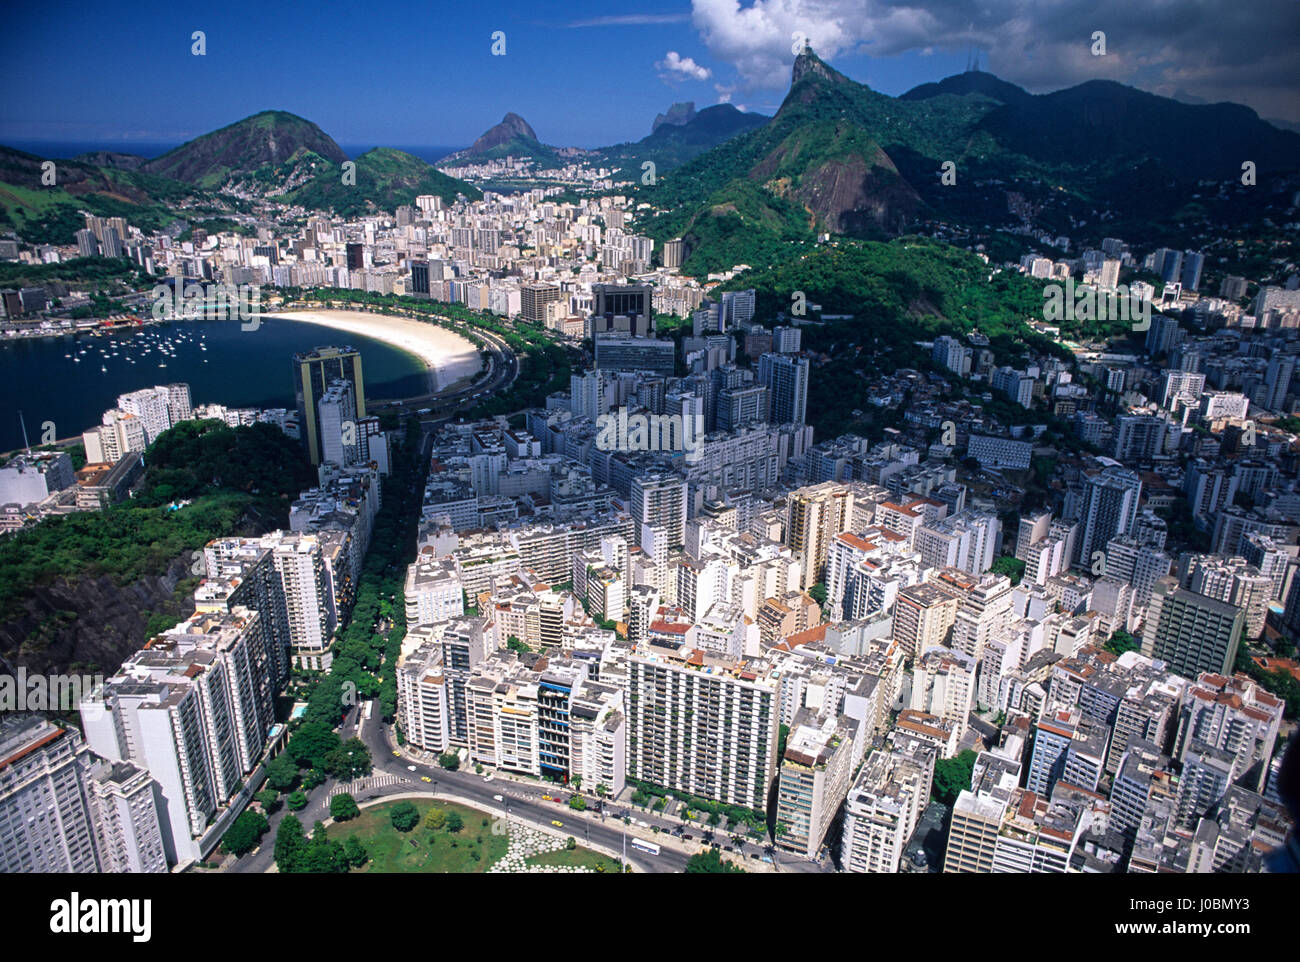 Aerial view of part of Rio de Janeiro south zone - Flamengo quarter in foreground linked to the Enseada de Botafogo ( Botafogo Cove or Botafogo beach ) in the middle by the tree lined Osvaldo Cruz avenue and Christ the Redeemer & the Tijuca Forest in background, Brazil. Stock Photo